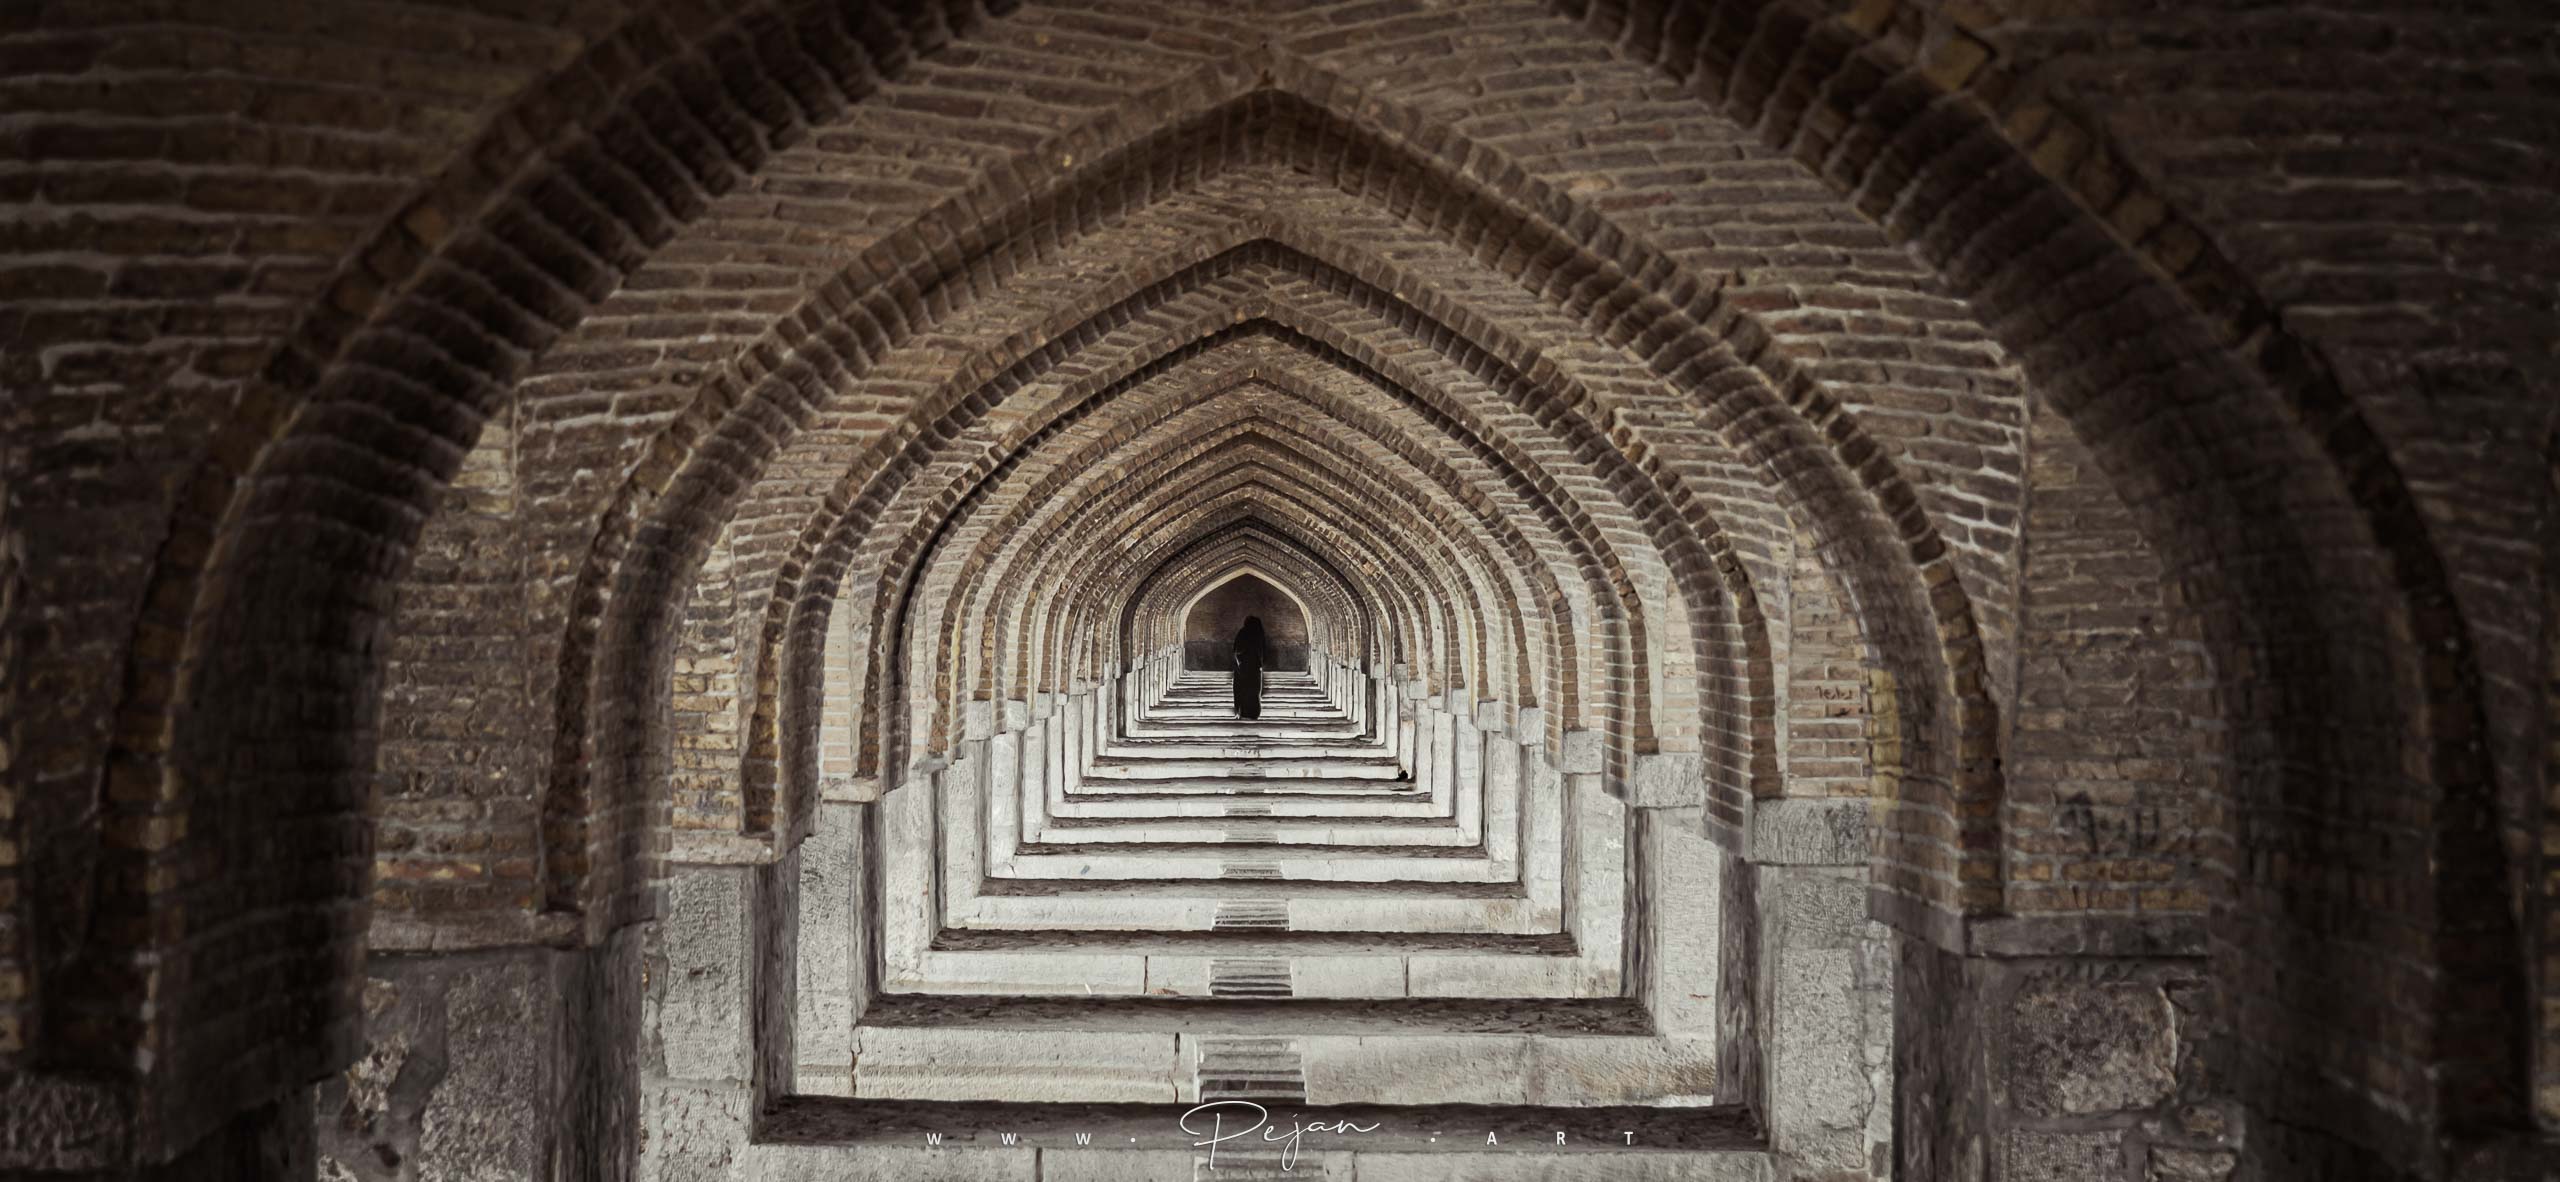 A woman wearing chador walks under the Khaju Bridge in Isfahan, Iran. Iconic image. Iranian architecture. Door tunnel. Perspective with vanishing point. repetition.